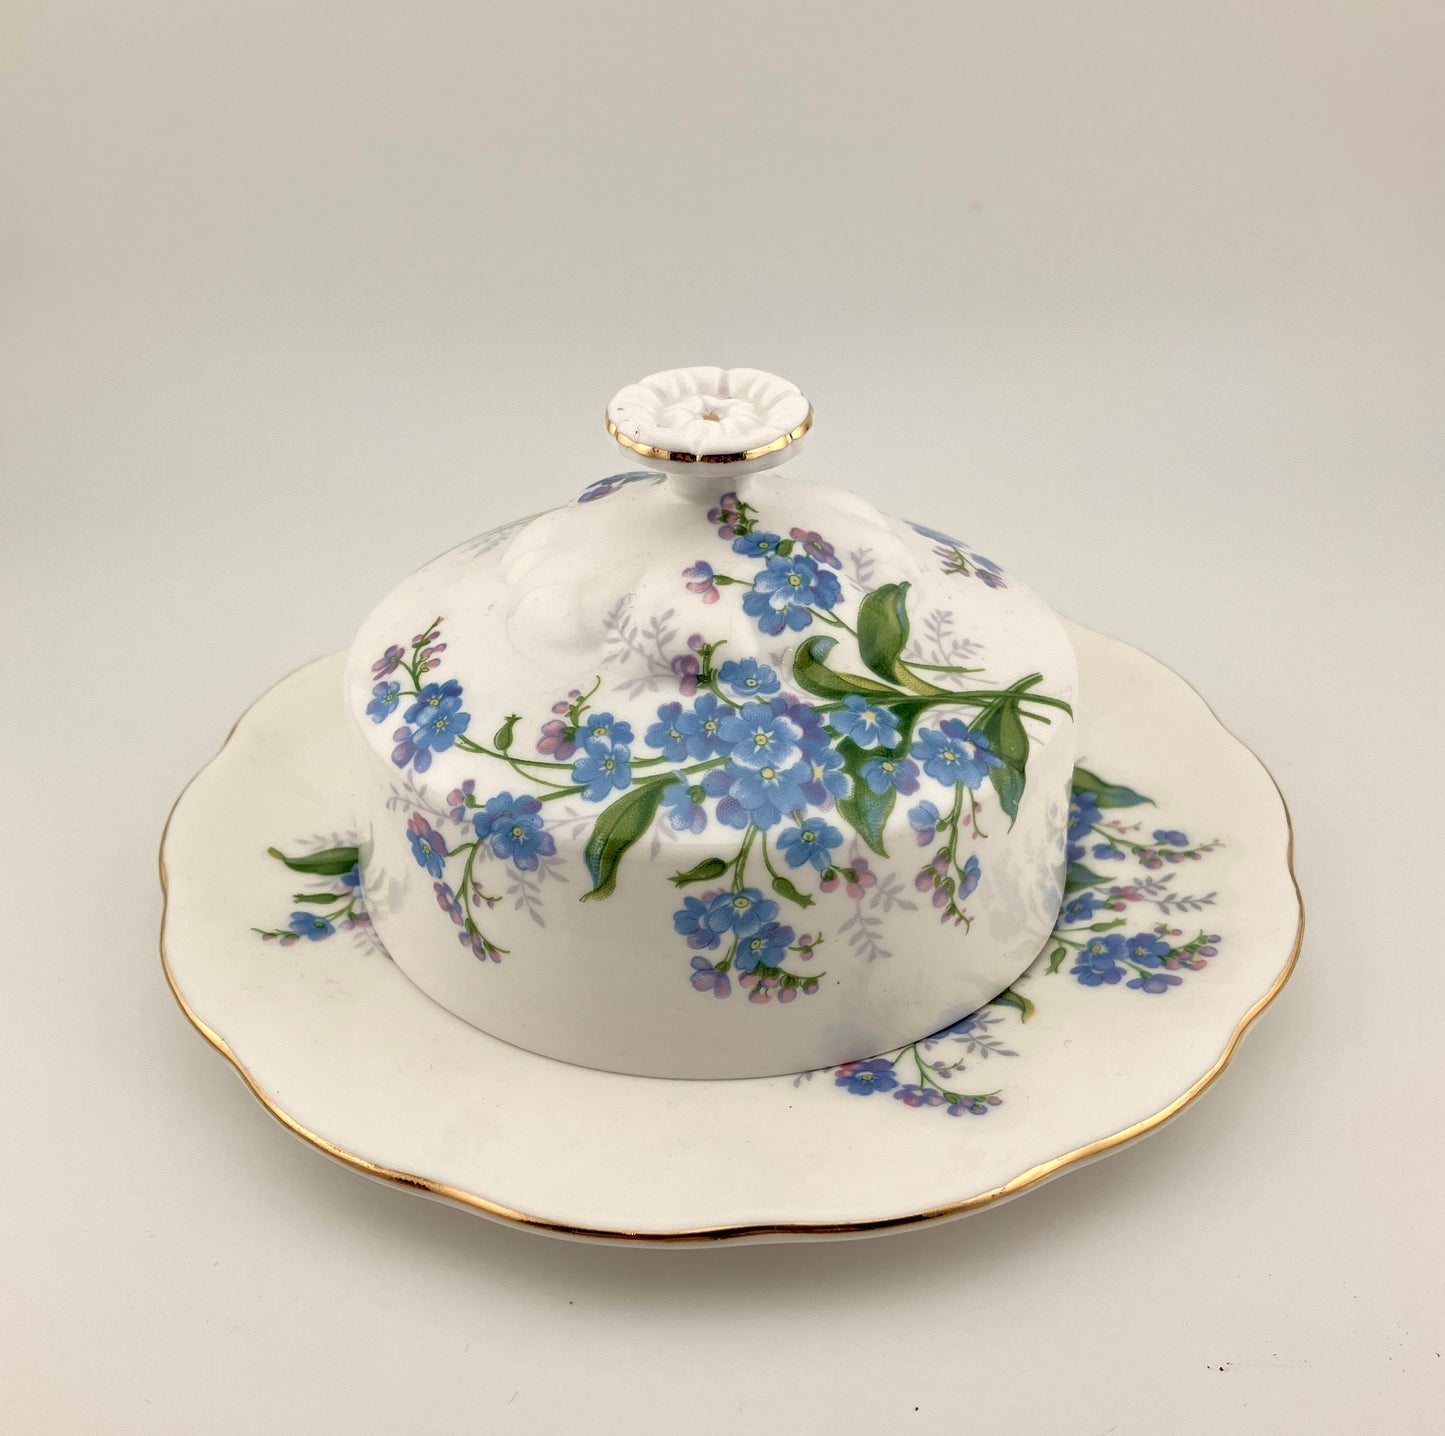 Royal Albert, Forget-Me-Not, Butter Dish, Vintage, Floral, Blue, Made in England